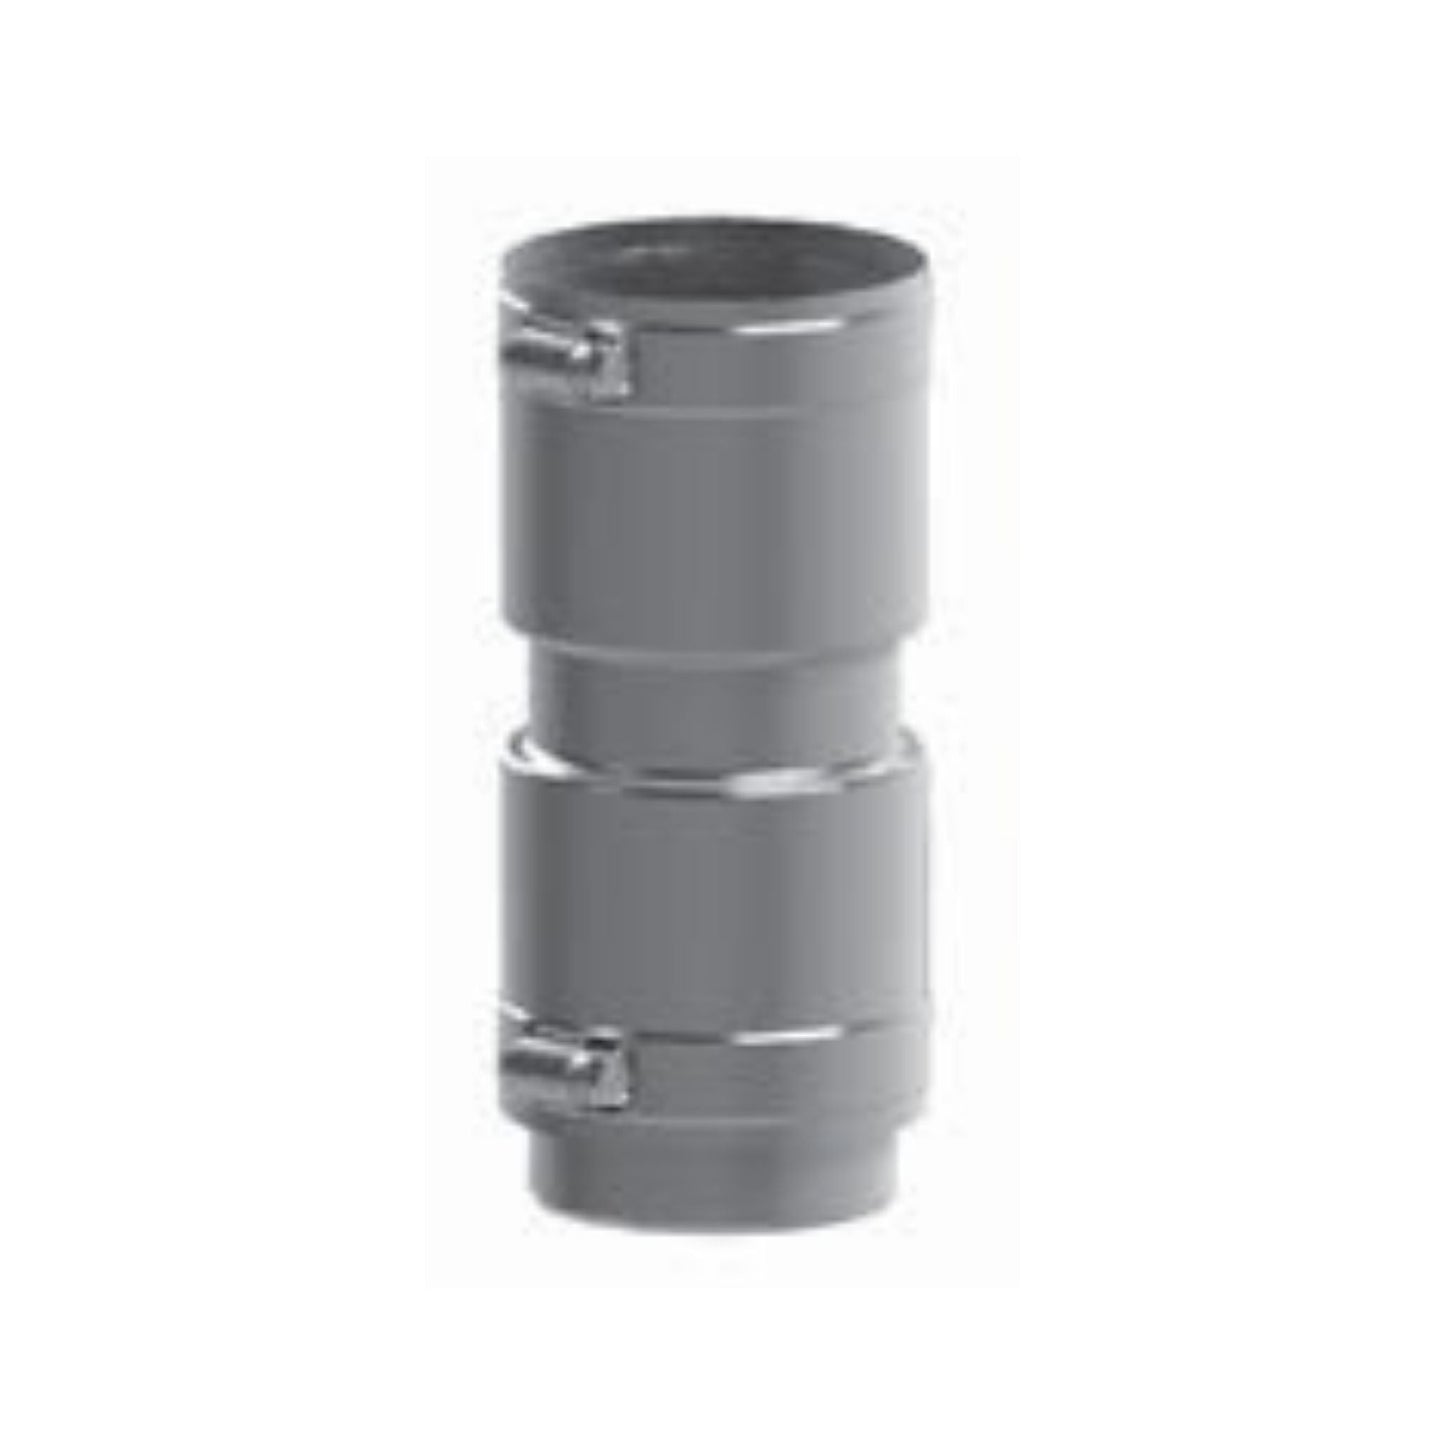 DuraVent FasNSeal Flex 3" 316L Stainless Steel Coupler